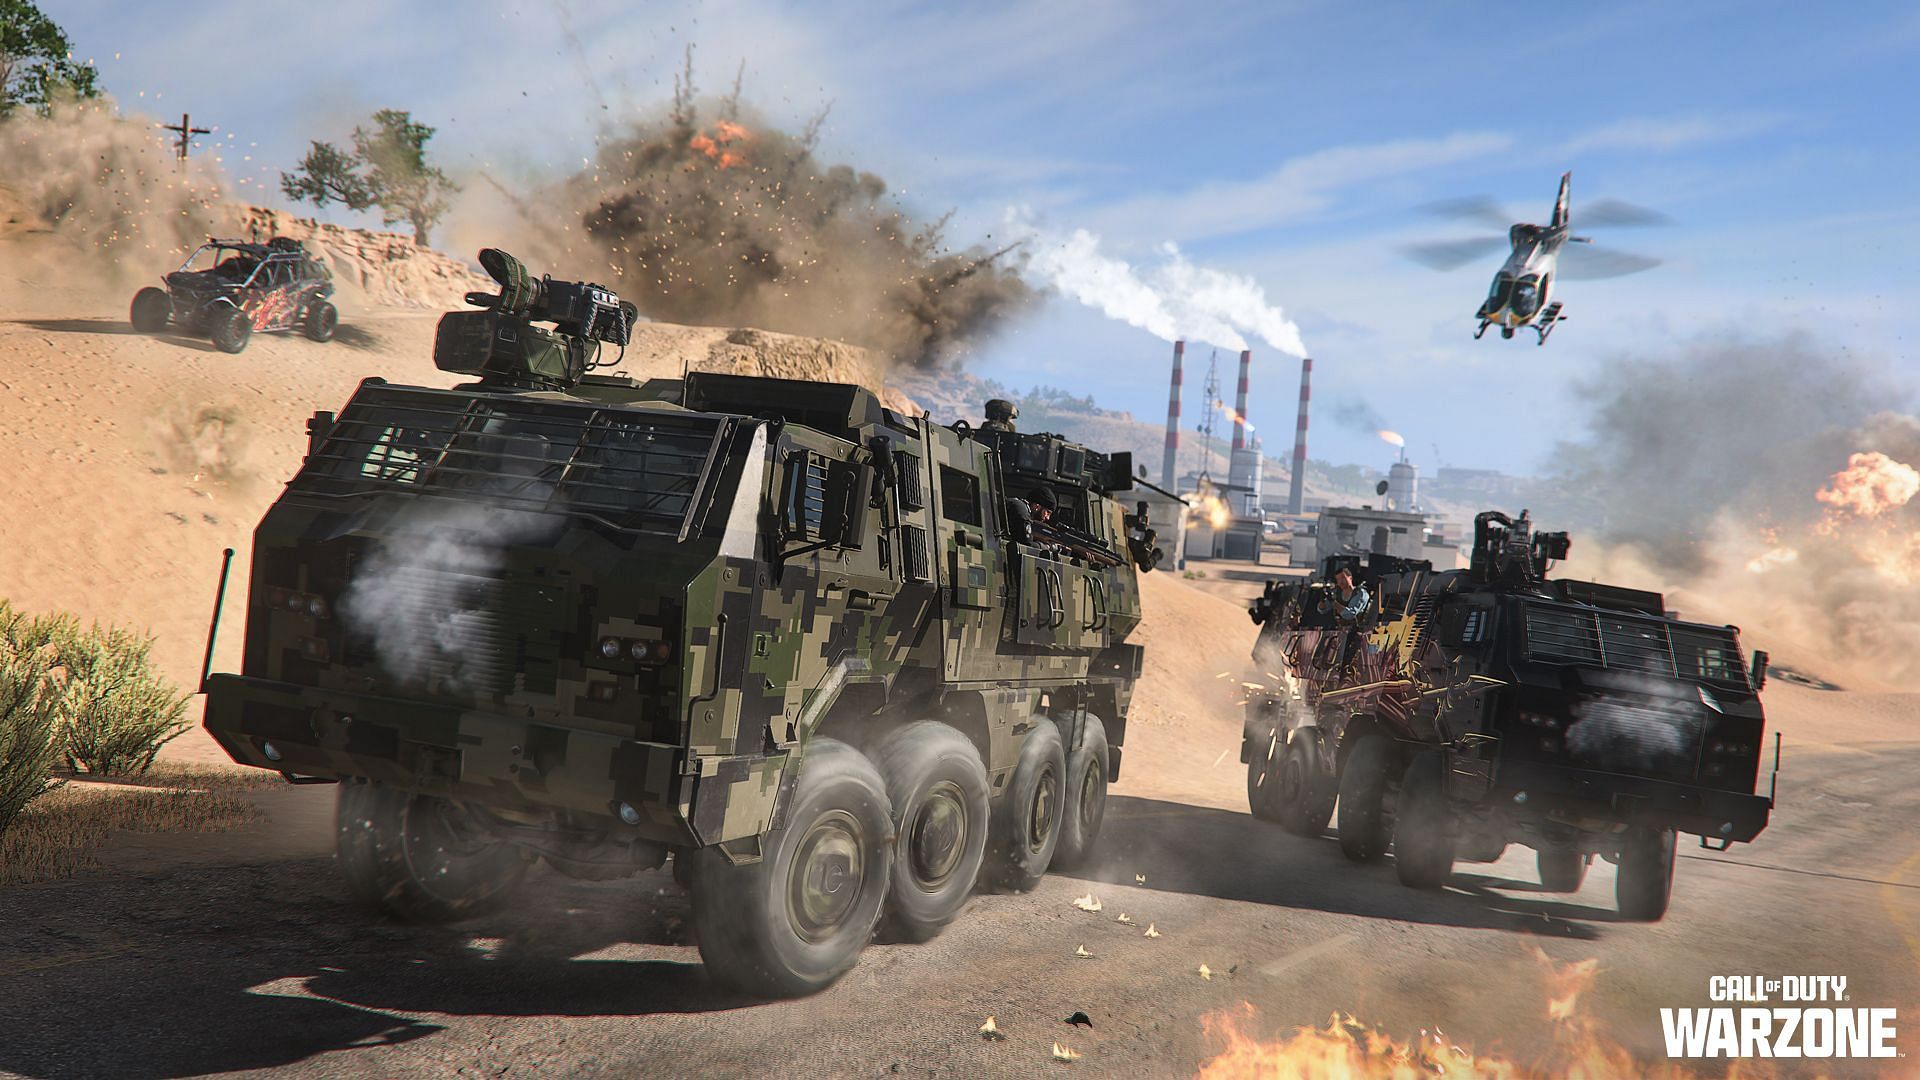 How to get a free MRAP from The Pharaoh in Warzone 2 The Haunting event